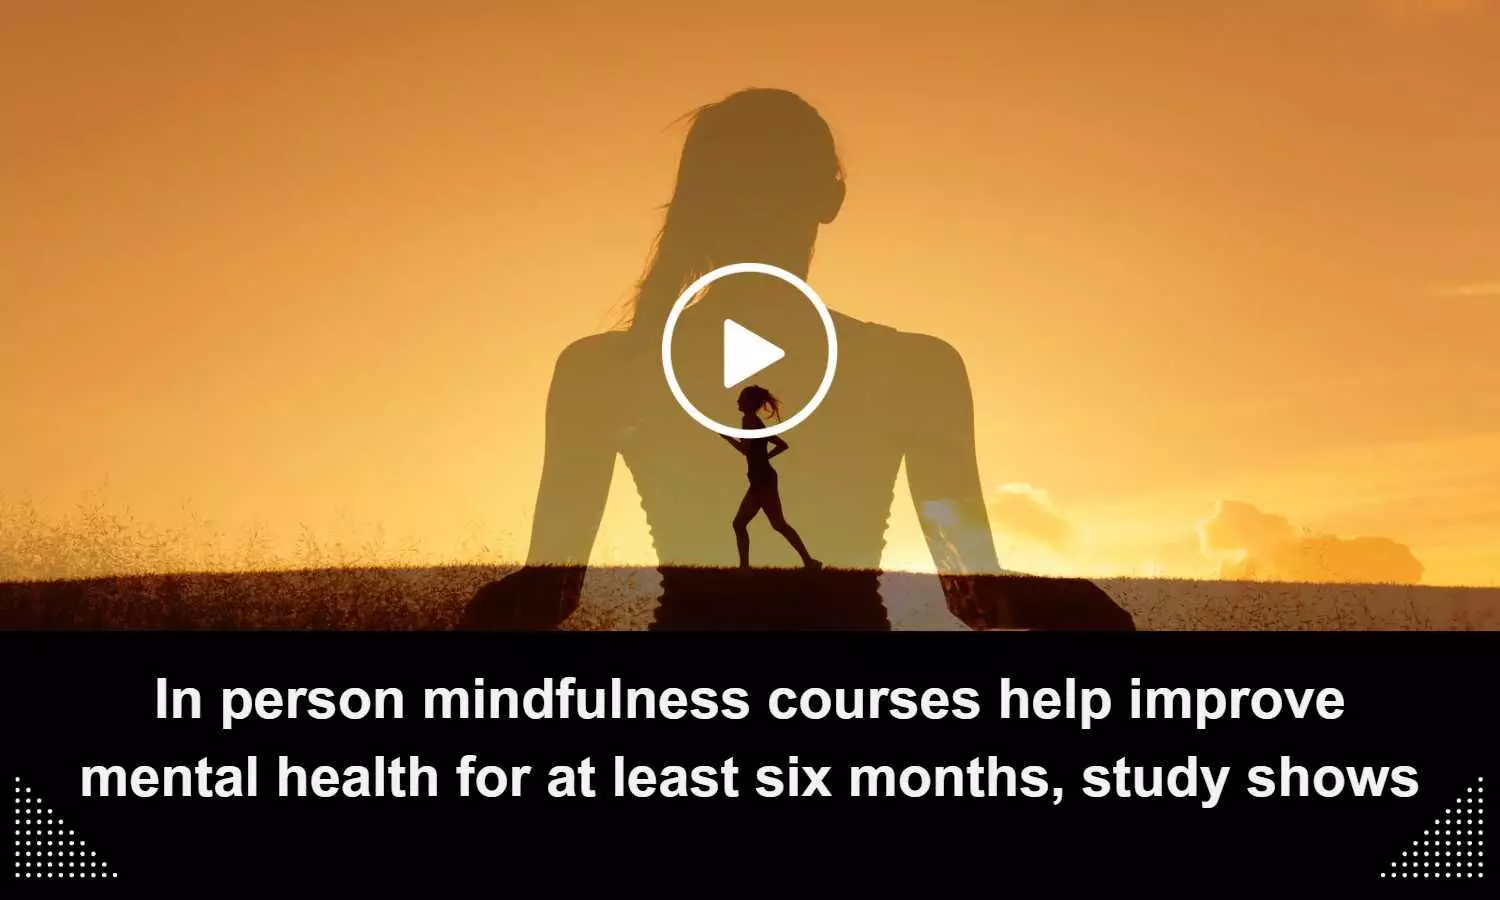 In-person mindfulness courses help improve mental health for at least six months, study shows